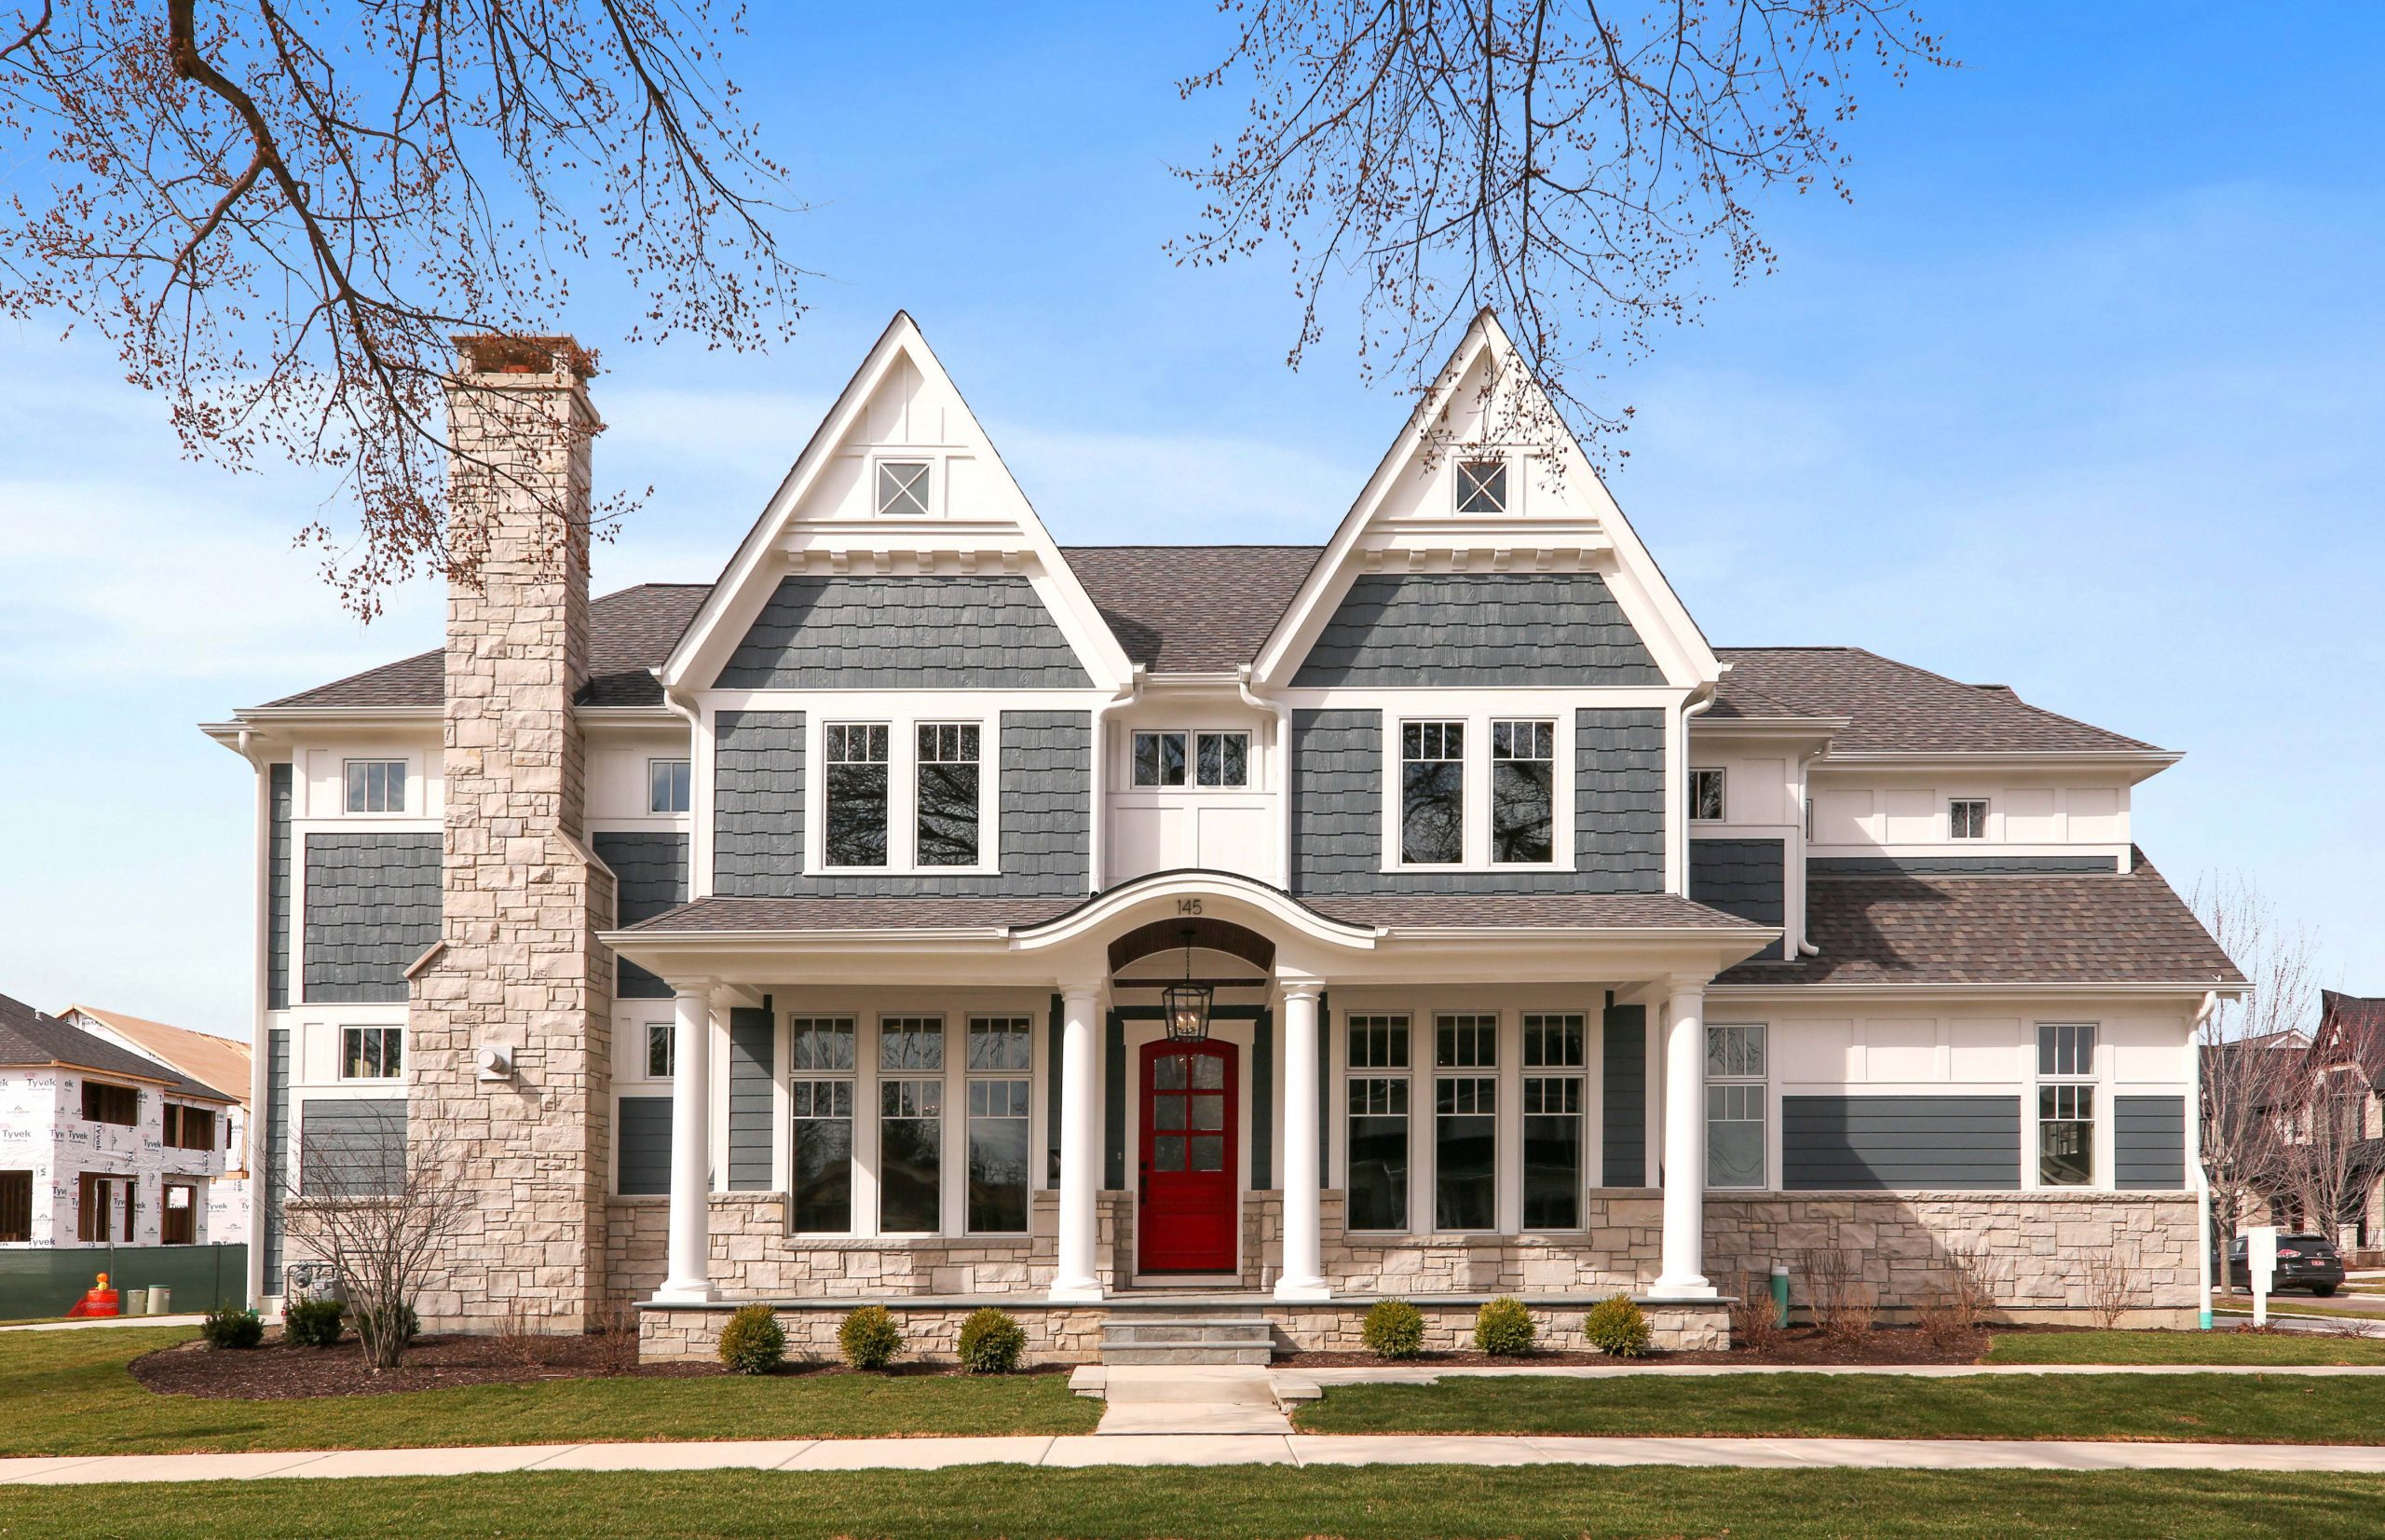 Classic red, white and blue house color scheme. Gray blue cedar shake siding with white trim and a bright red front door.